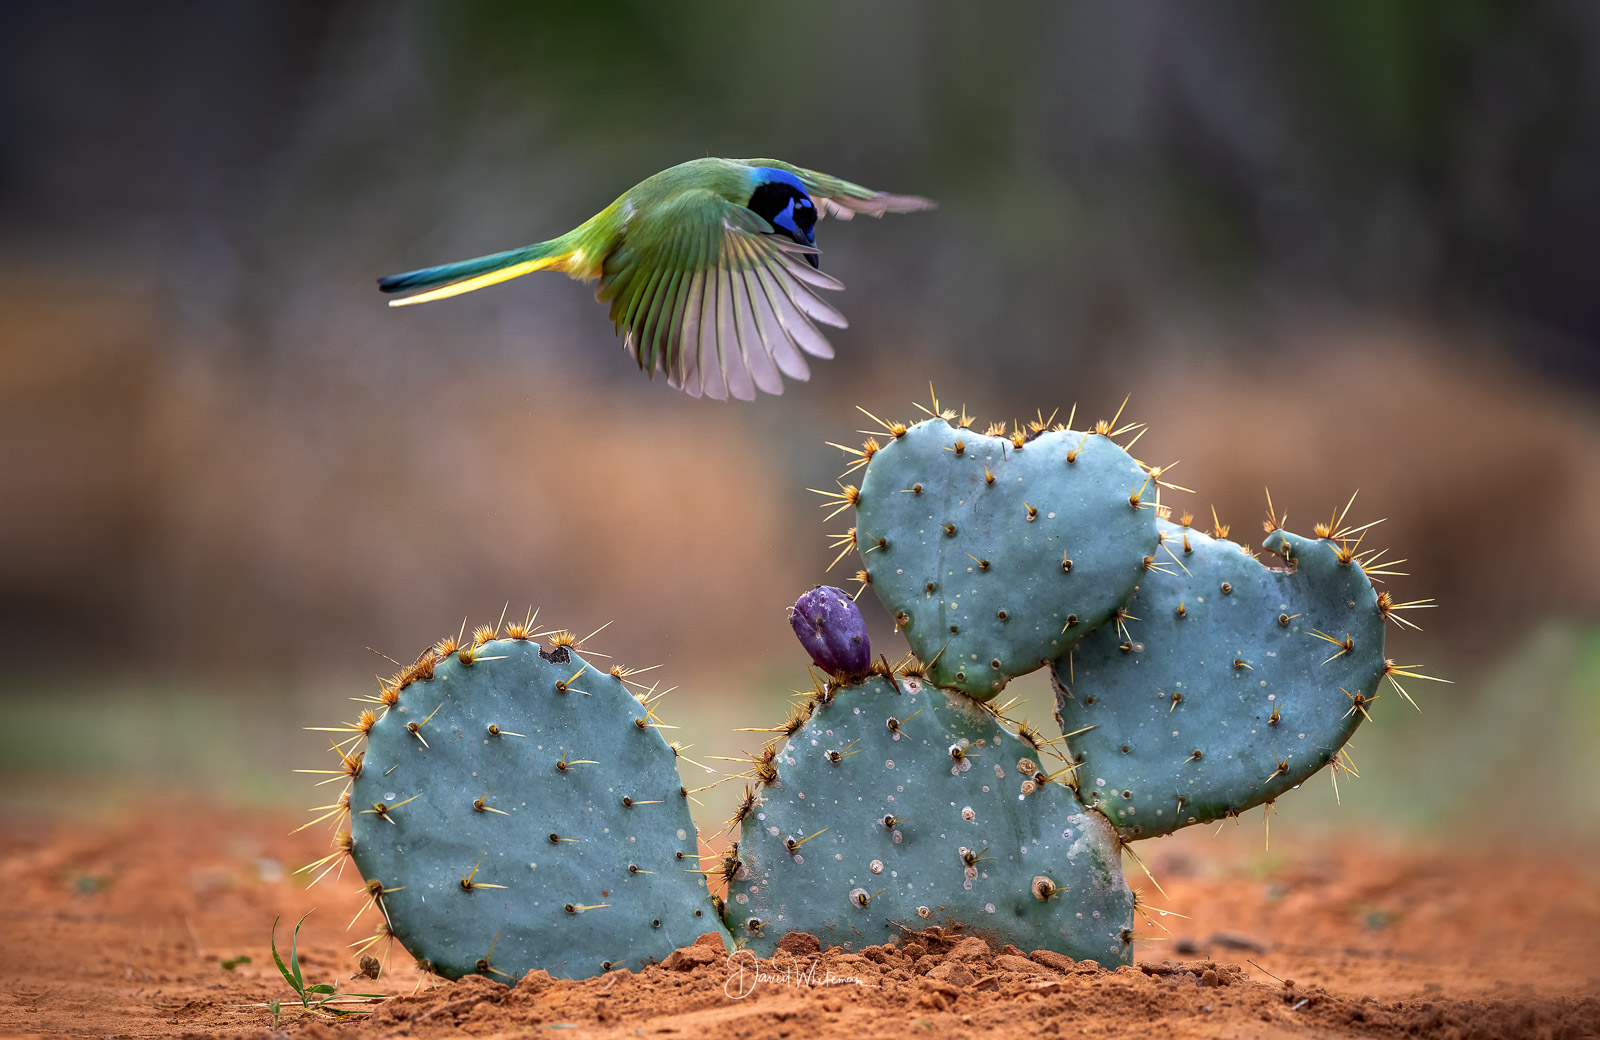 Green Jay Over Cactus